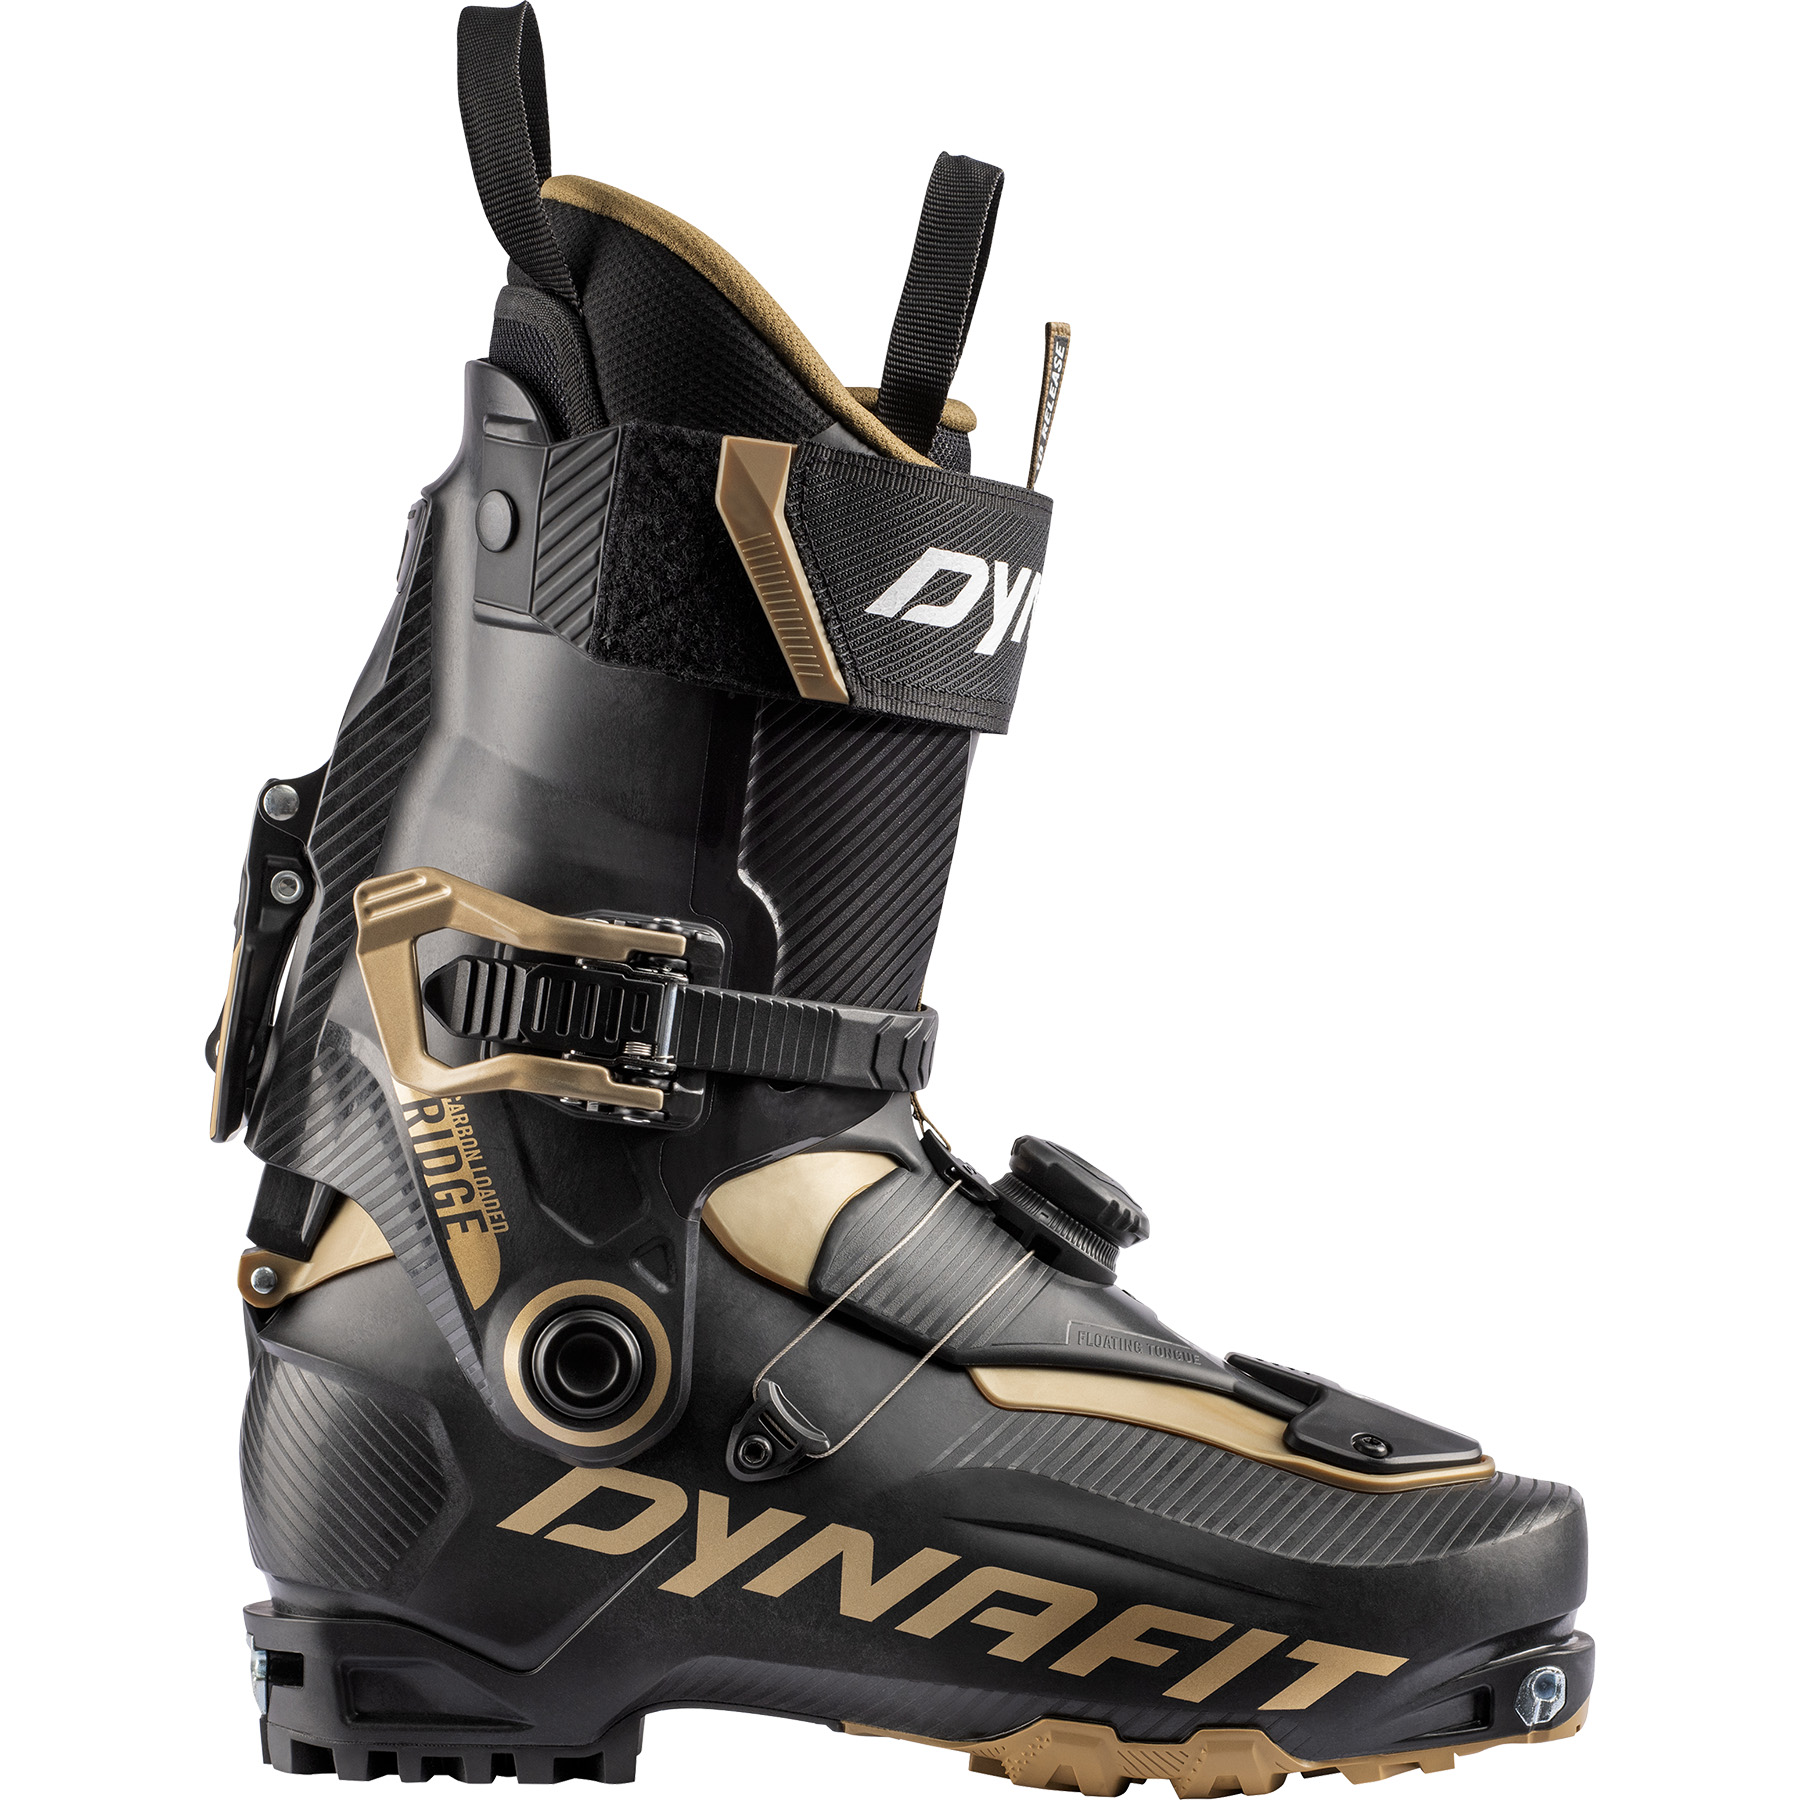 Dynafit & Hoji announce new Dynafit Ridge and Ridge Pro ski boots; BLISTER discusses the details of the boots